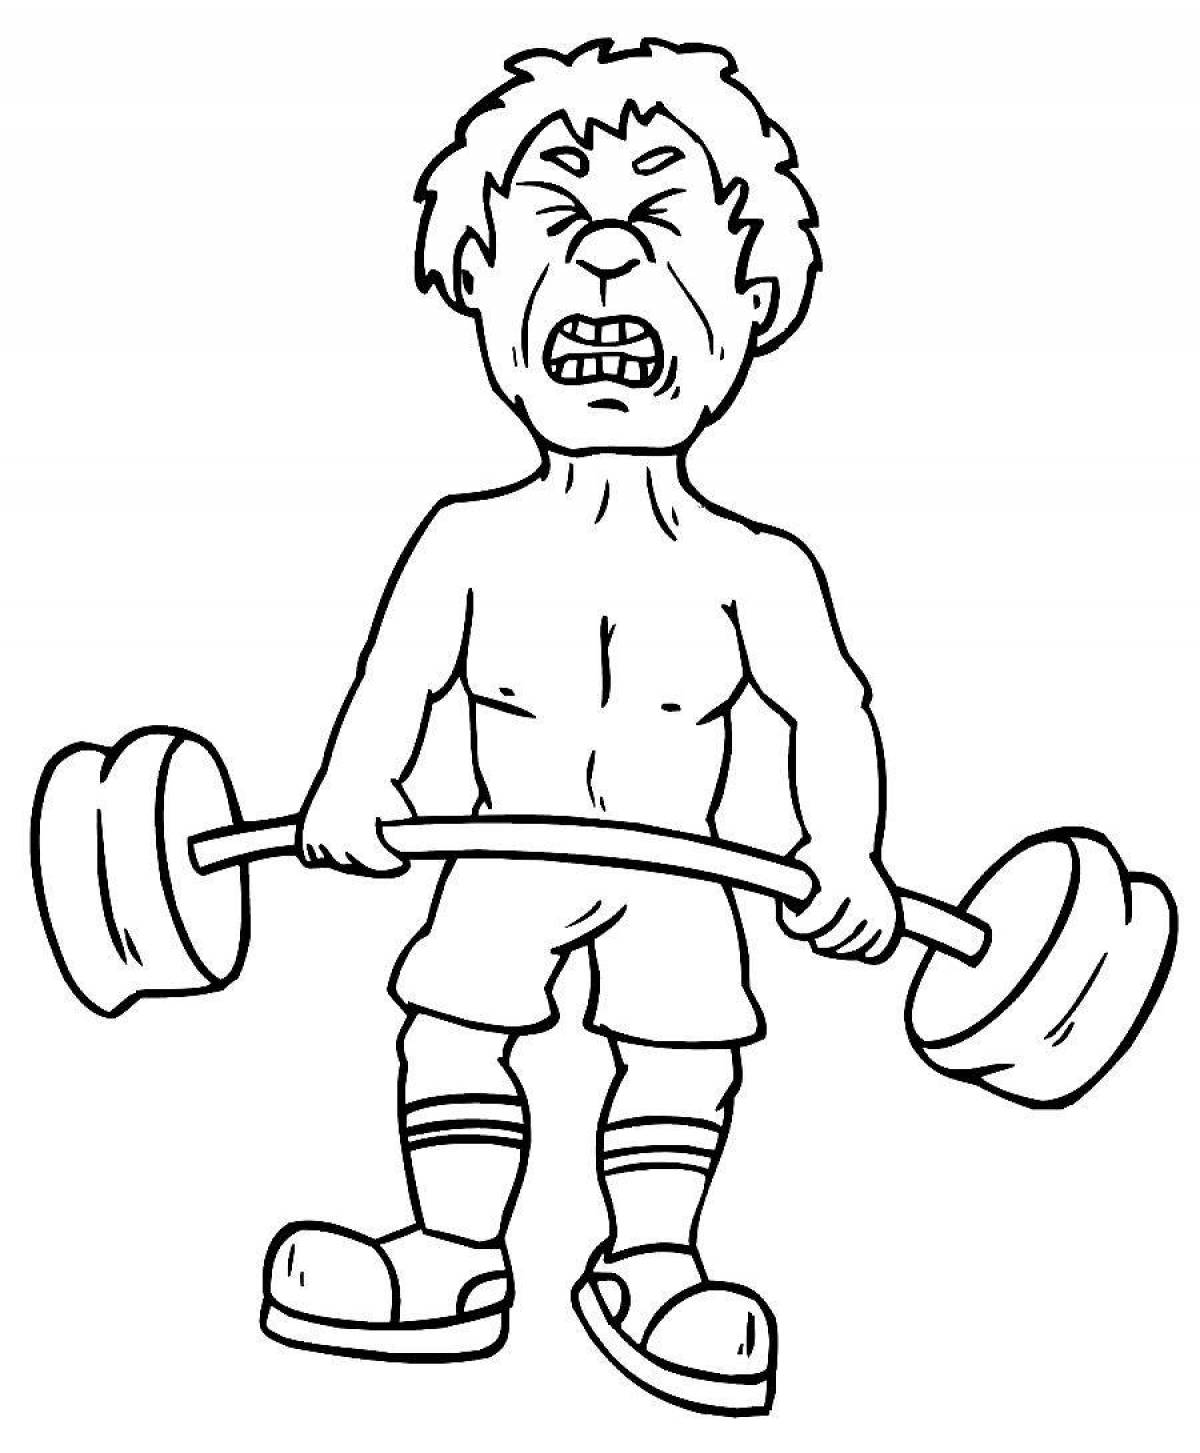 Coloring book shining weightlifter